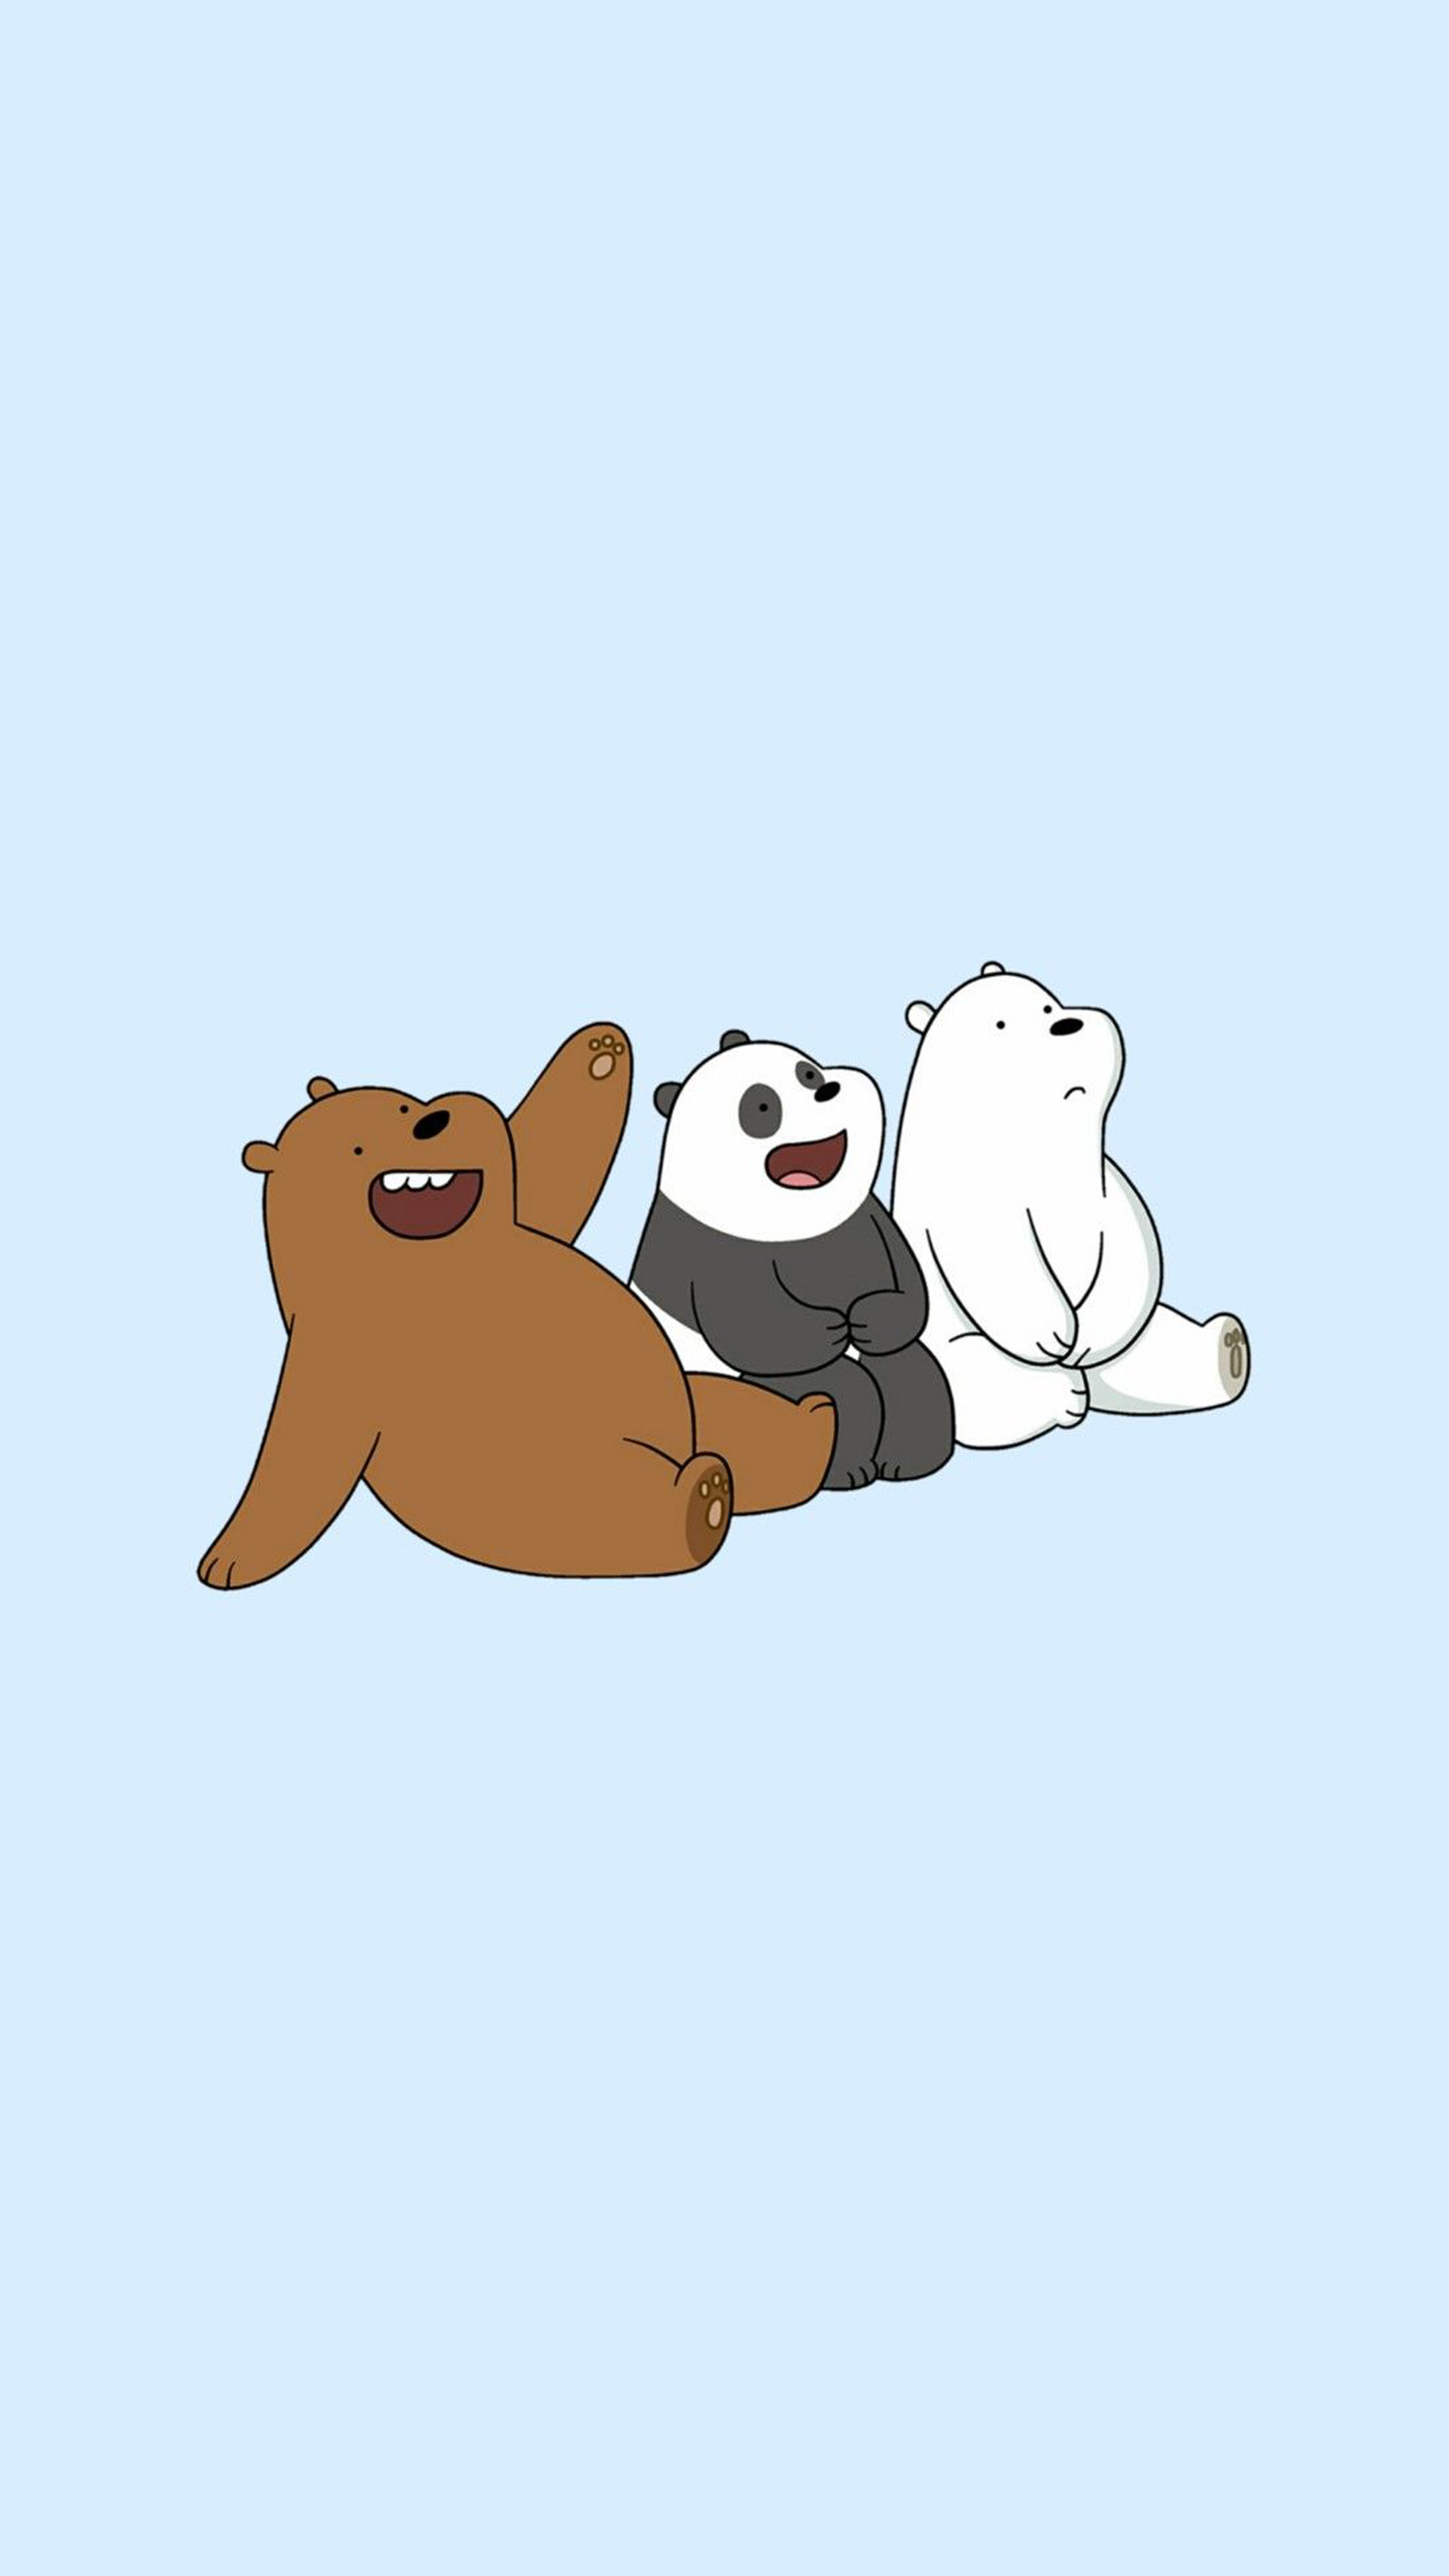 We Bare Bears Wallpapers - Top 15 Best We Bare Bears Wallpapers [ HQ ]